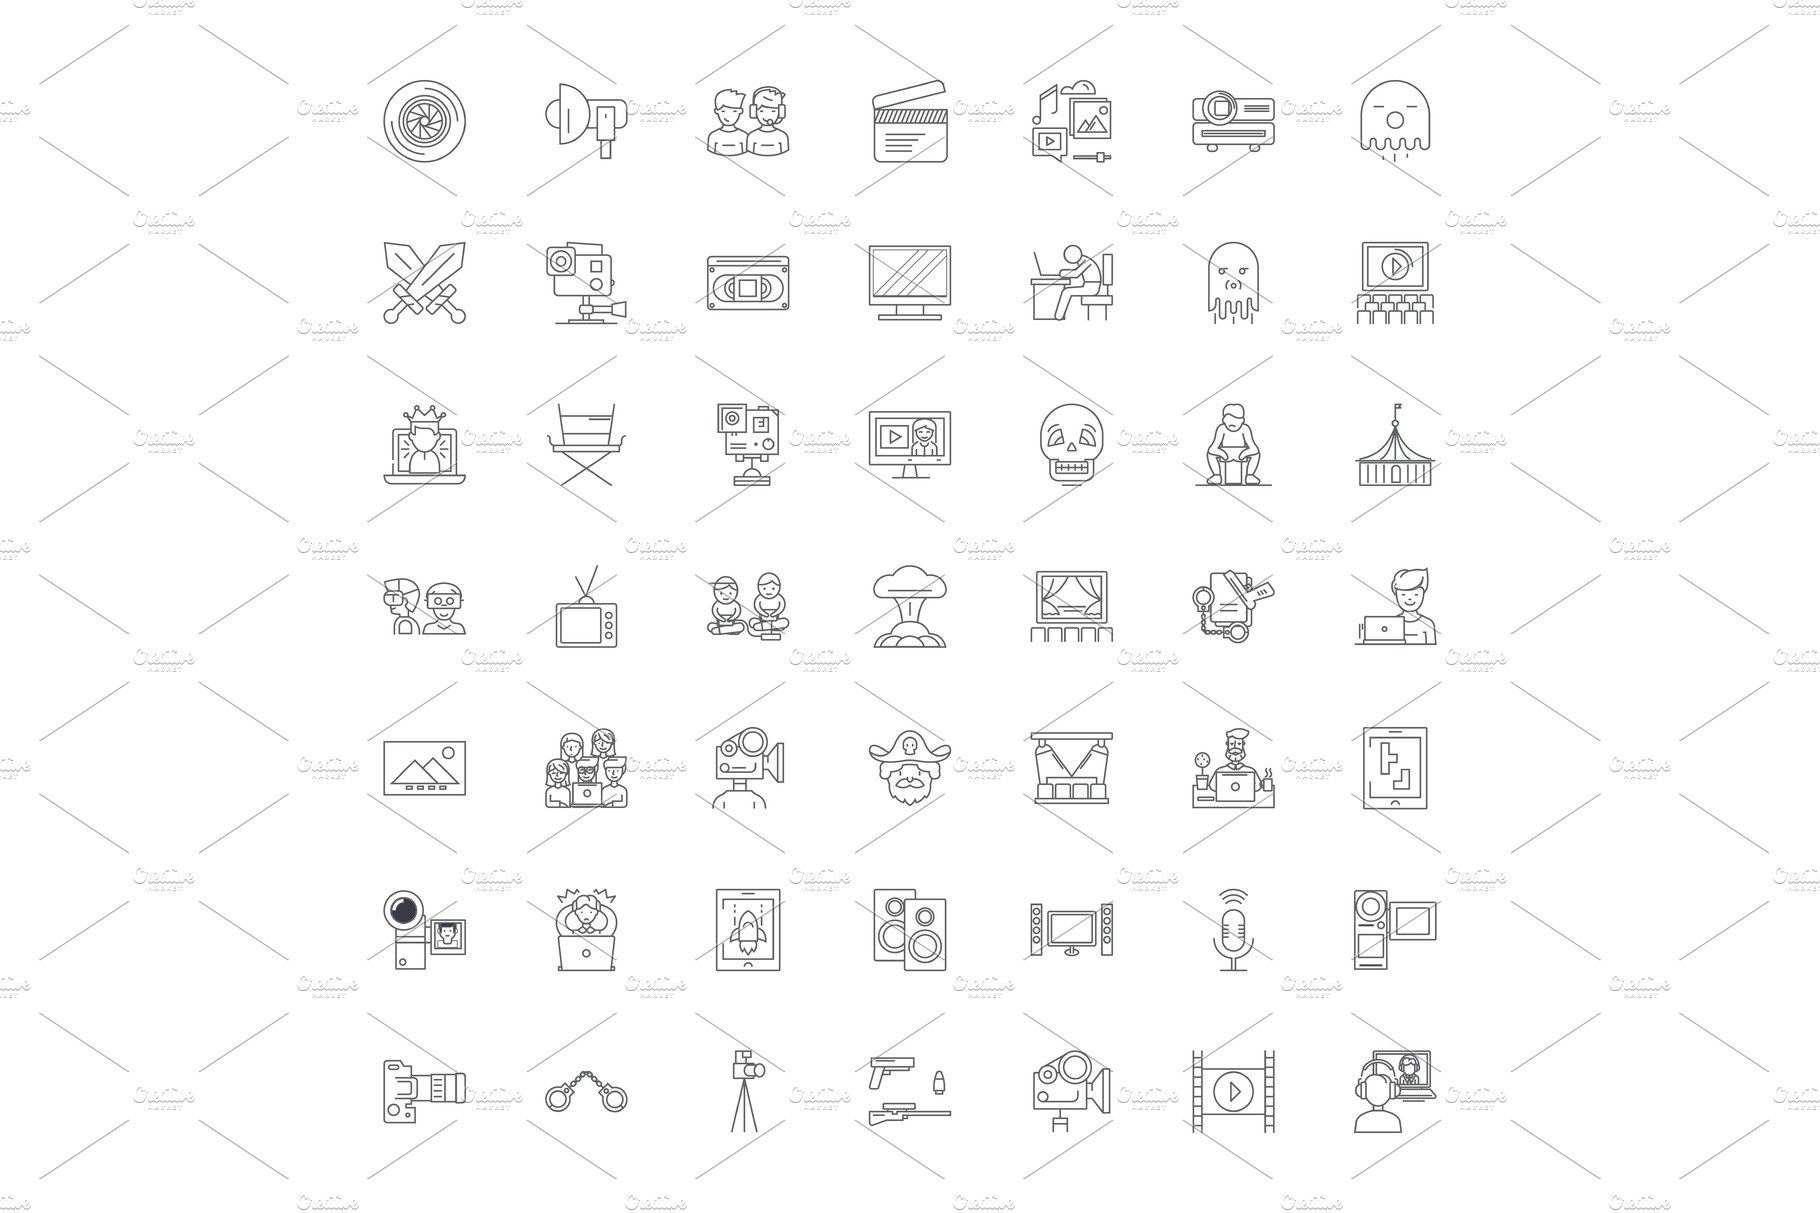 Cinema linear icons, signs, symbols cover image.